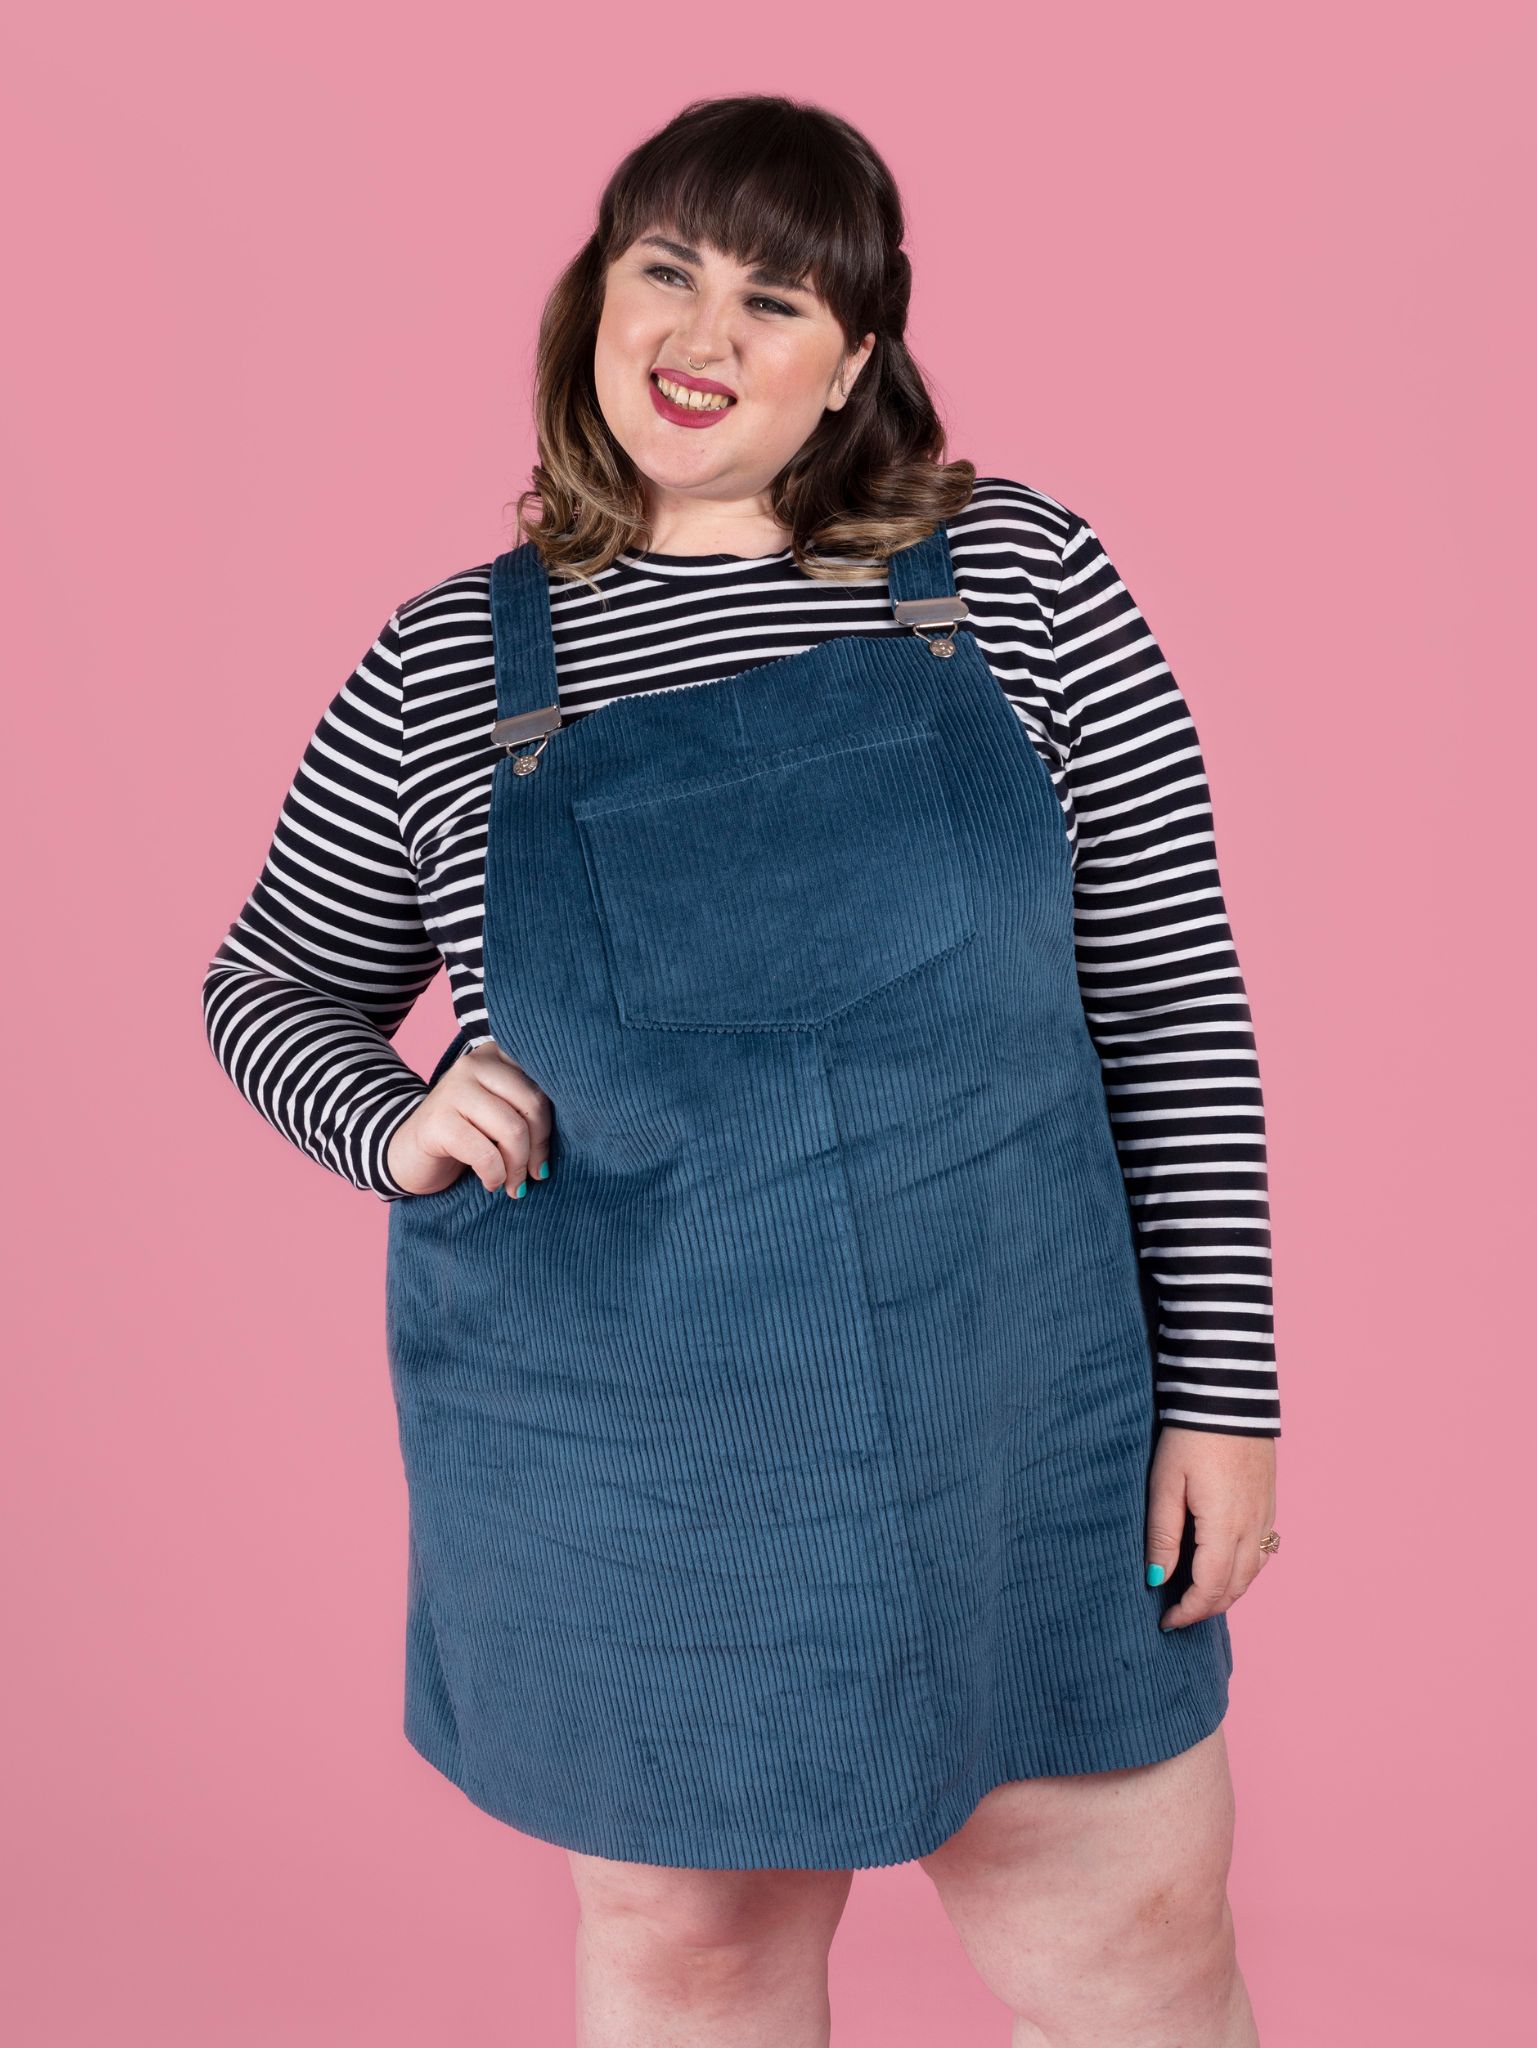 Tilly and the Buttons Cleo Pinafore and Dungaree Dress